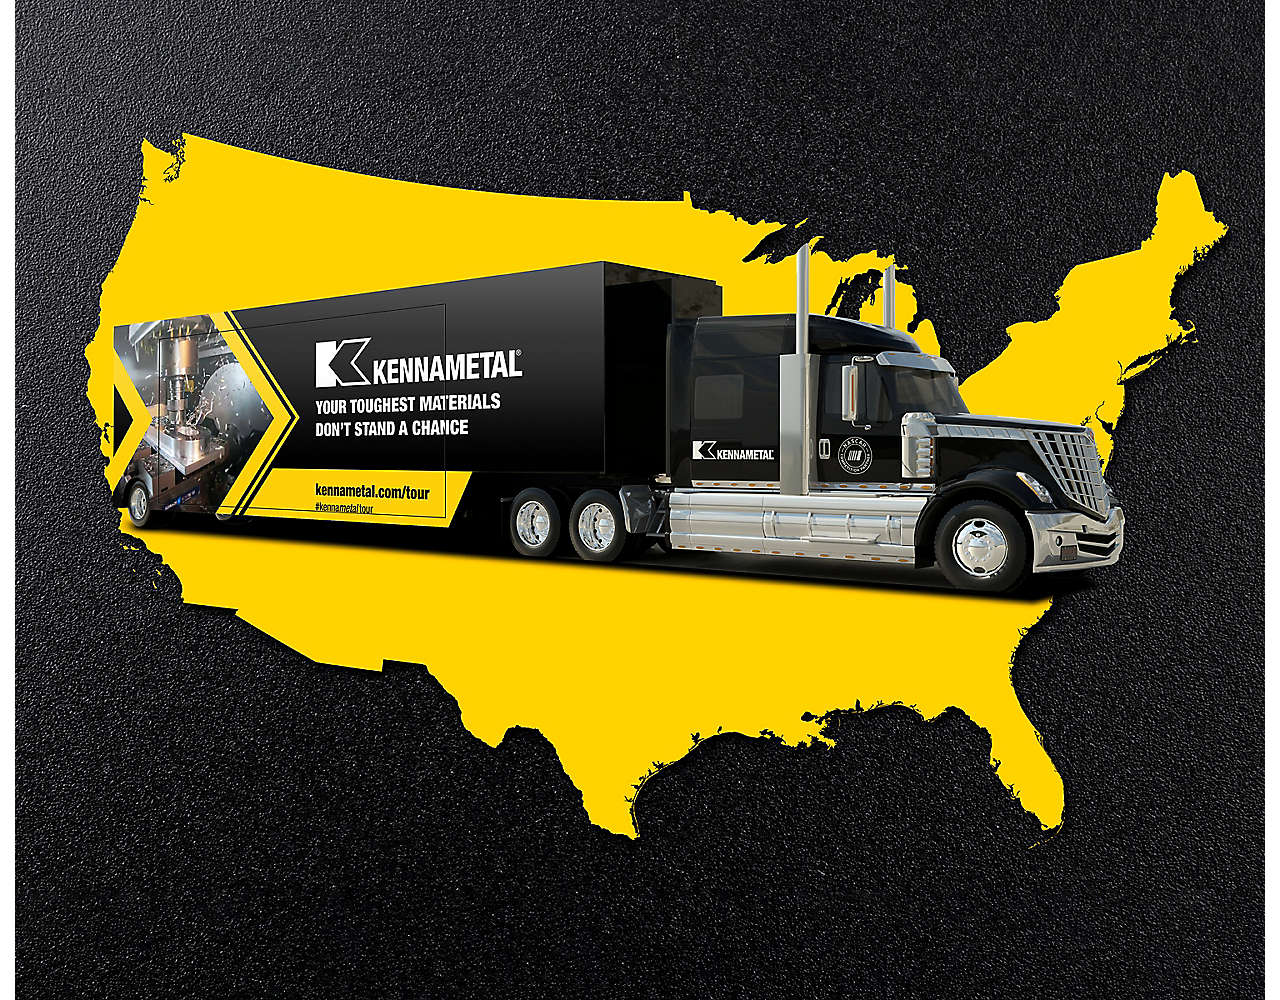 Kennametal Road Show truck with a United States map